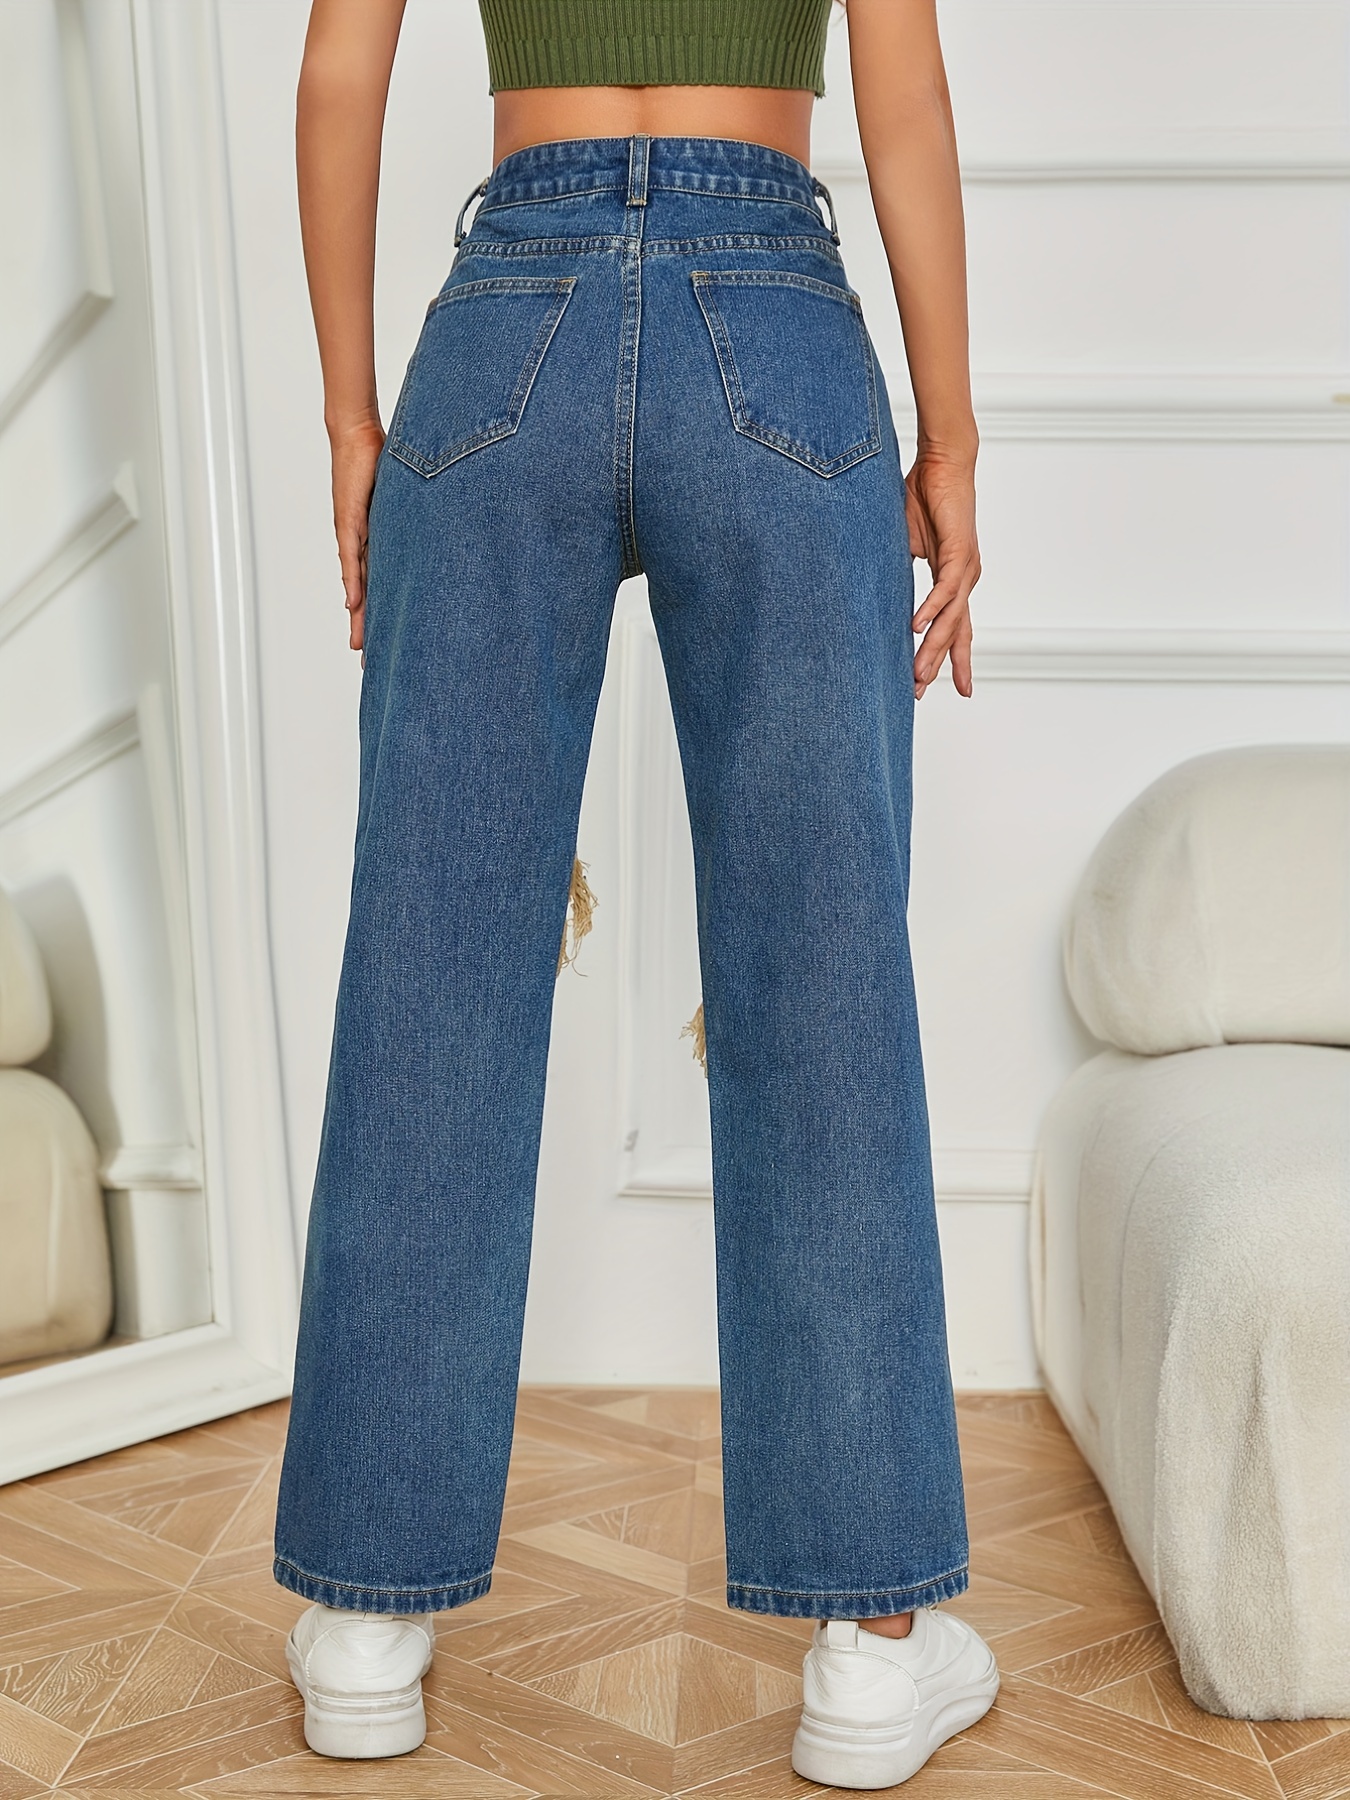 Retro Oversized Denim Wide High Jeans With Ripped Holes And